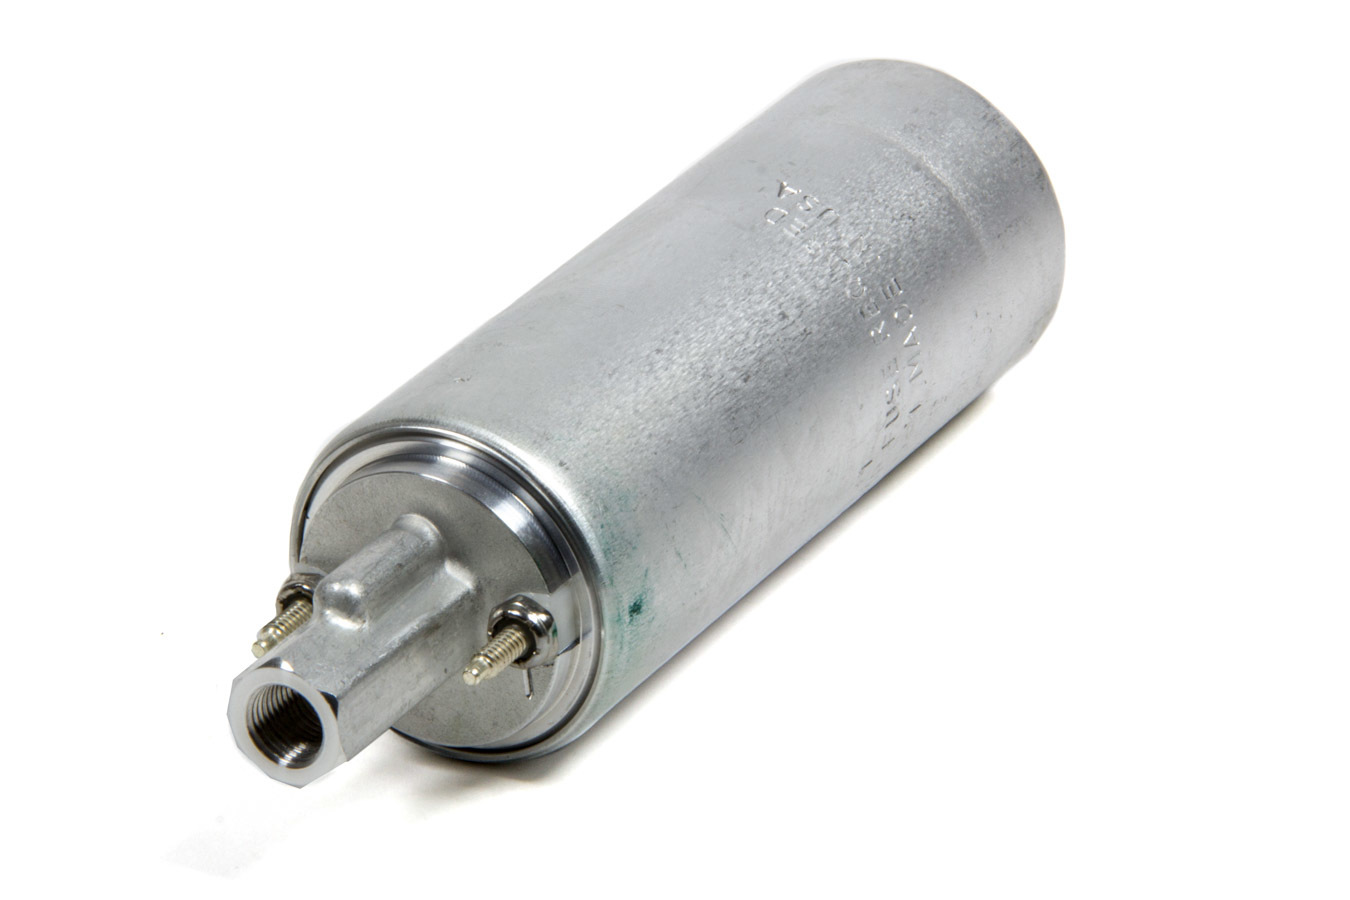 Walbro GSL391 Fuel Pump, GSL, Electric, In-Line, 190 lph, 10 mm x 1.00 Female Inlet, 10 mm x 1.00 Female Outlet, Gas, Each